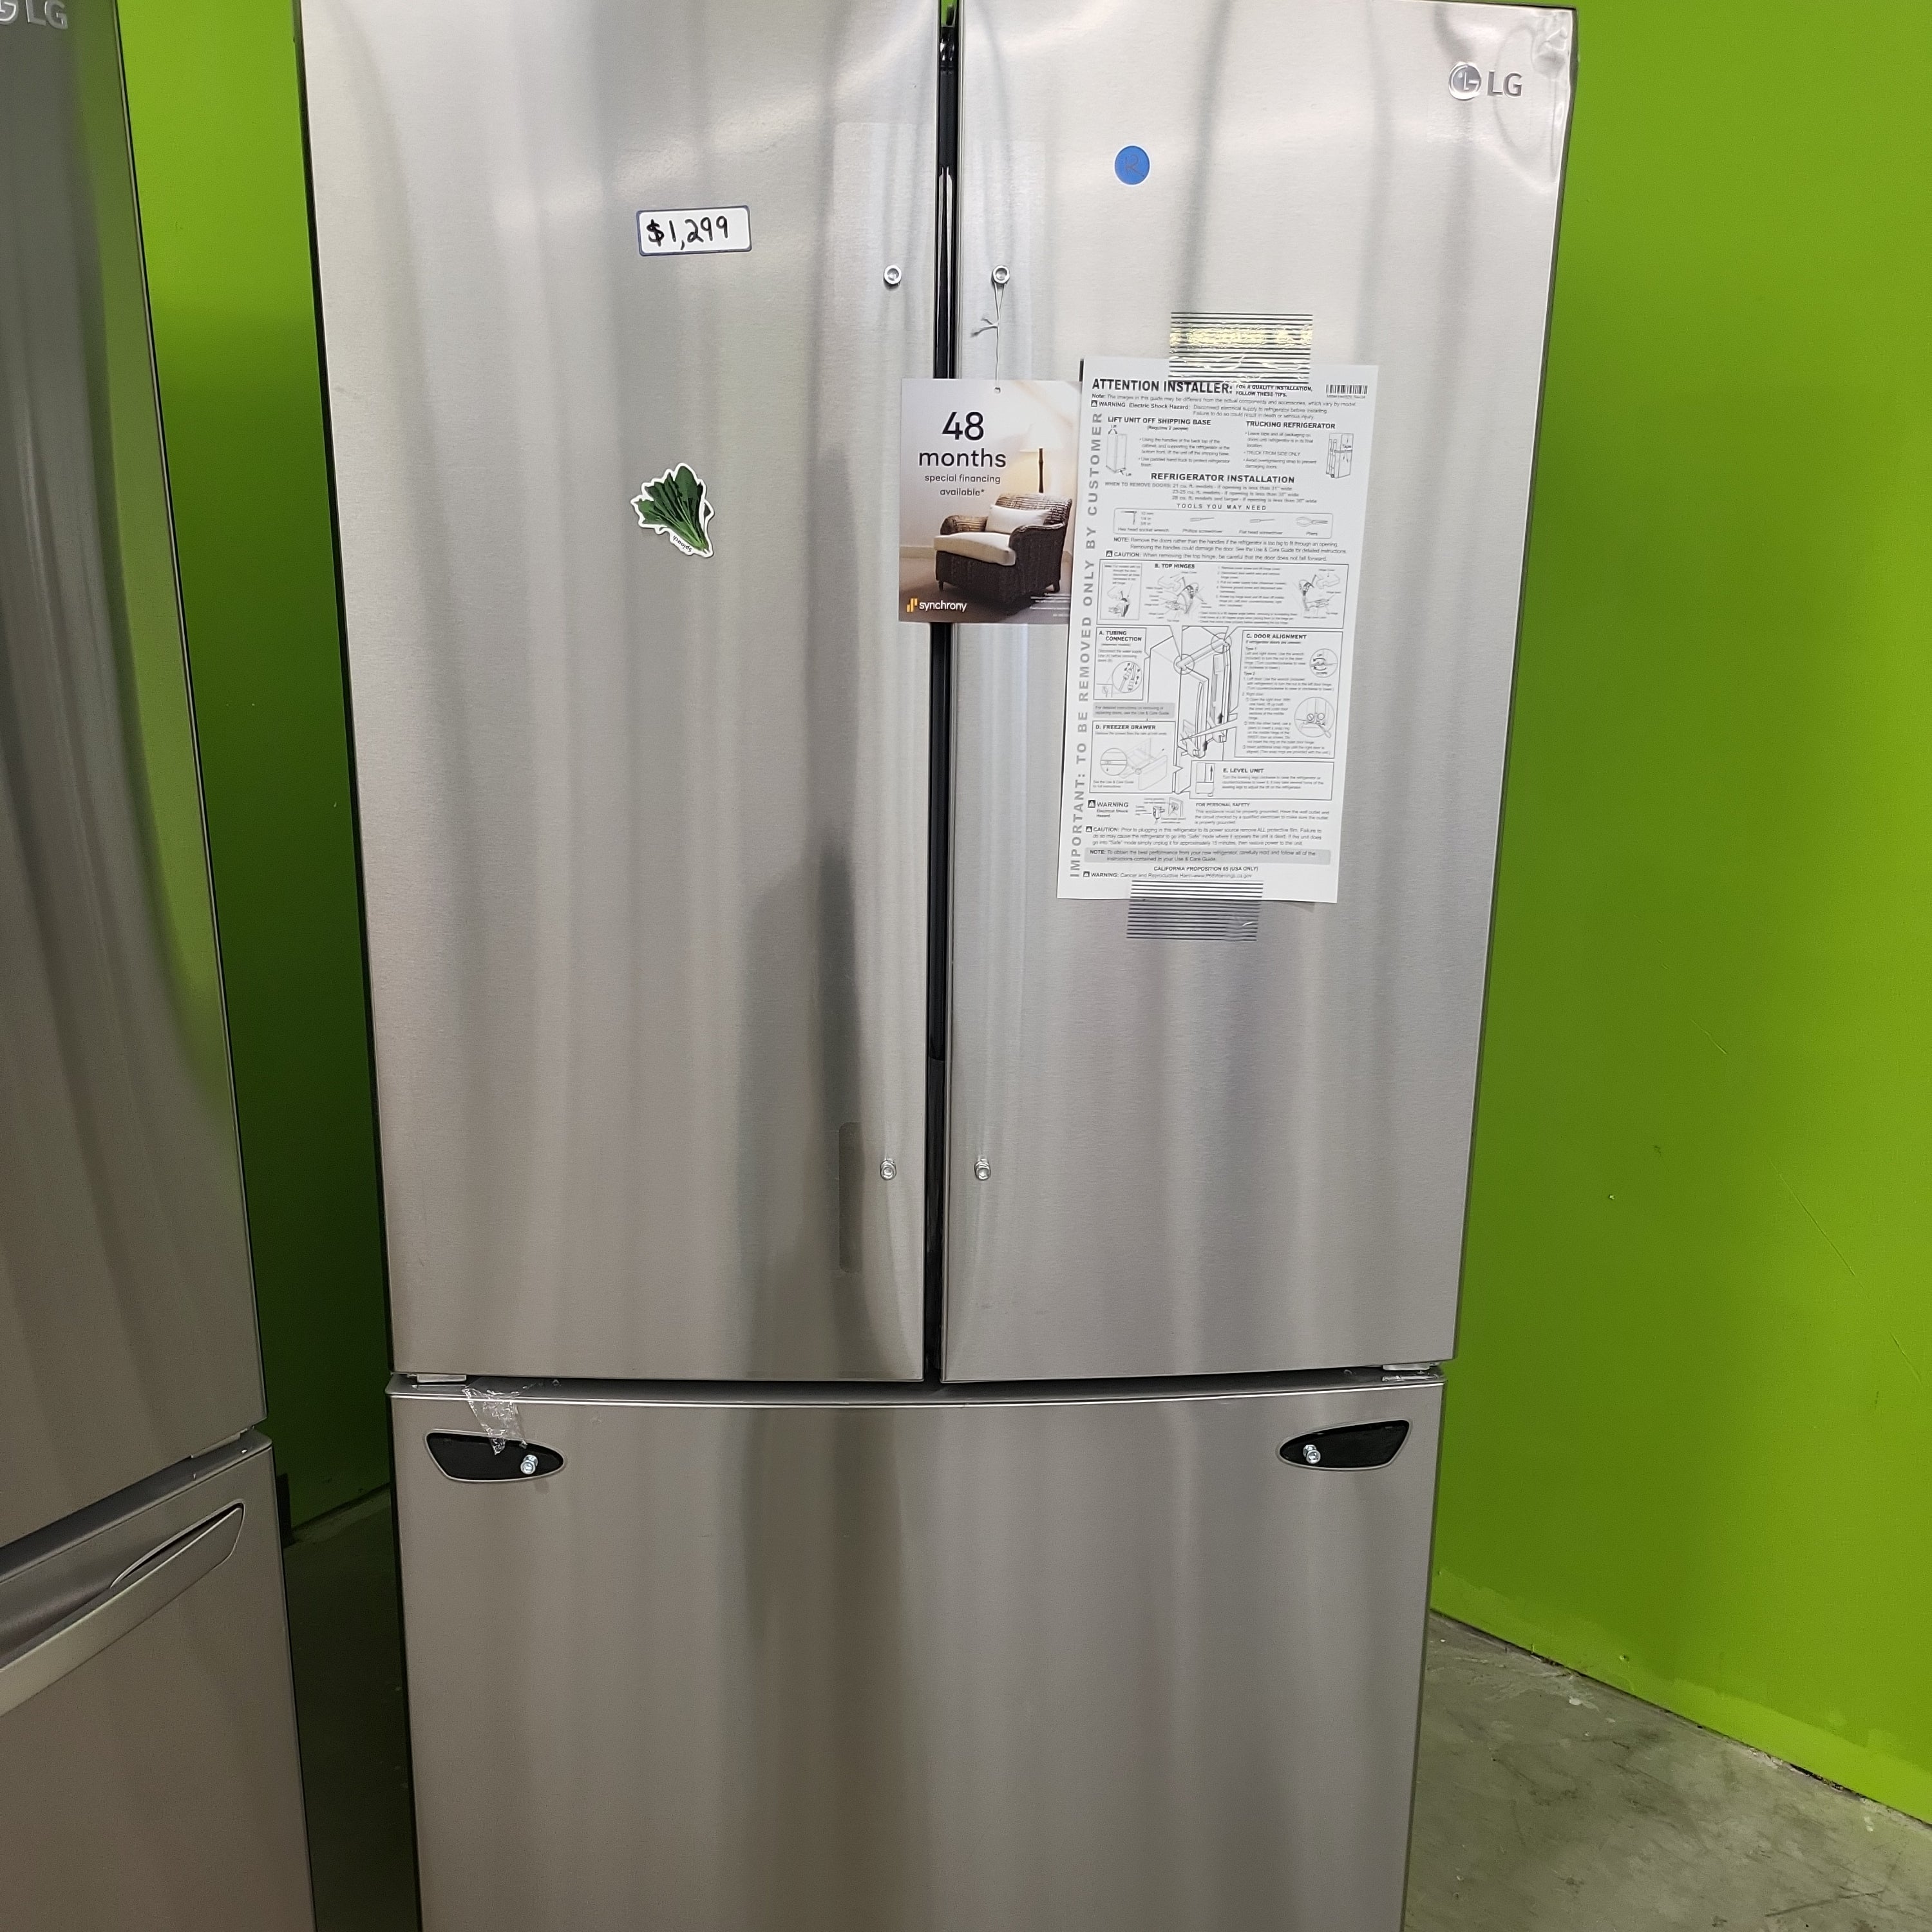 Samsung 22-cu ft Smart French Door Refrigerator with Ice Maker